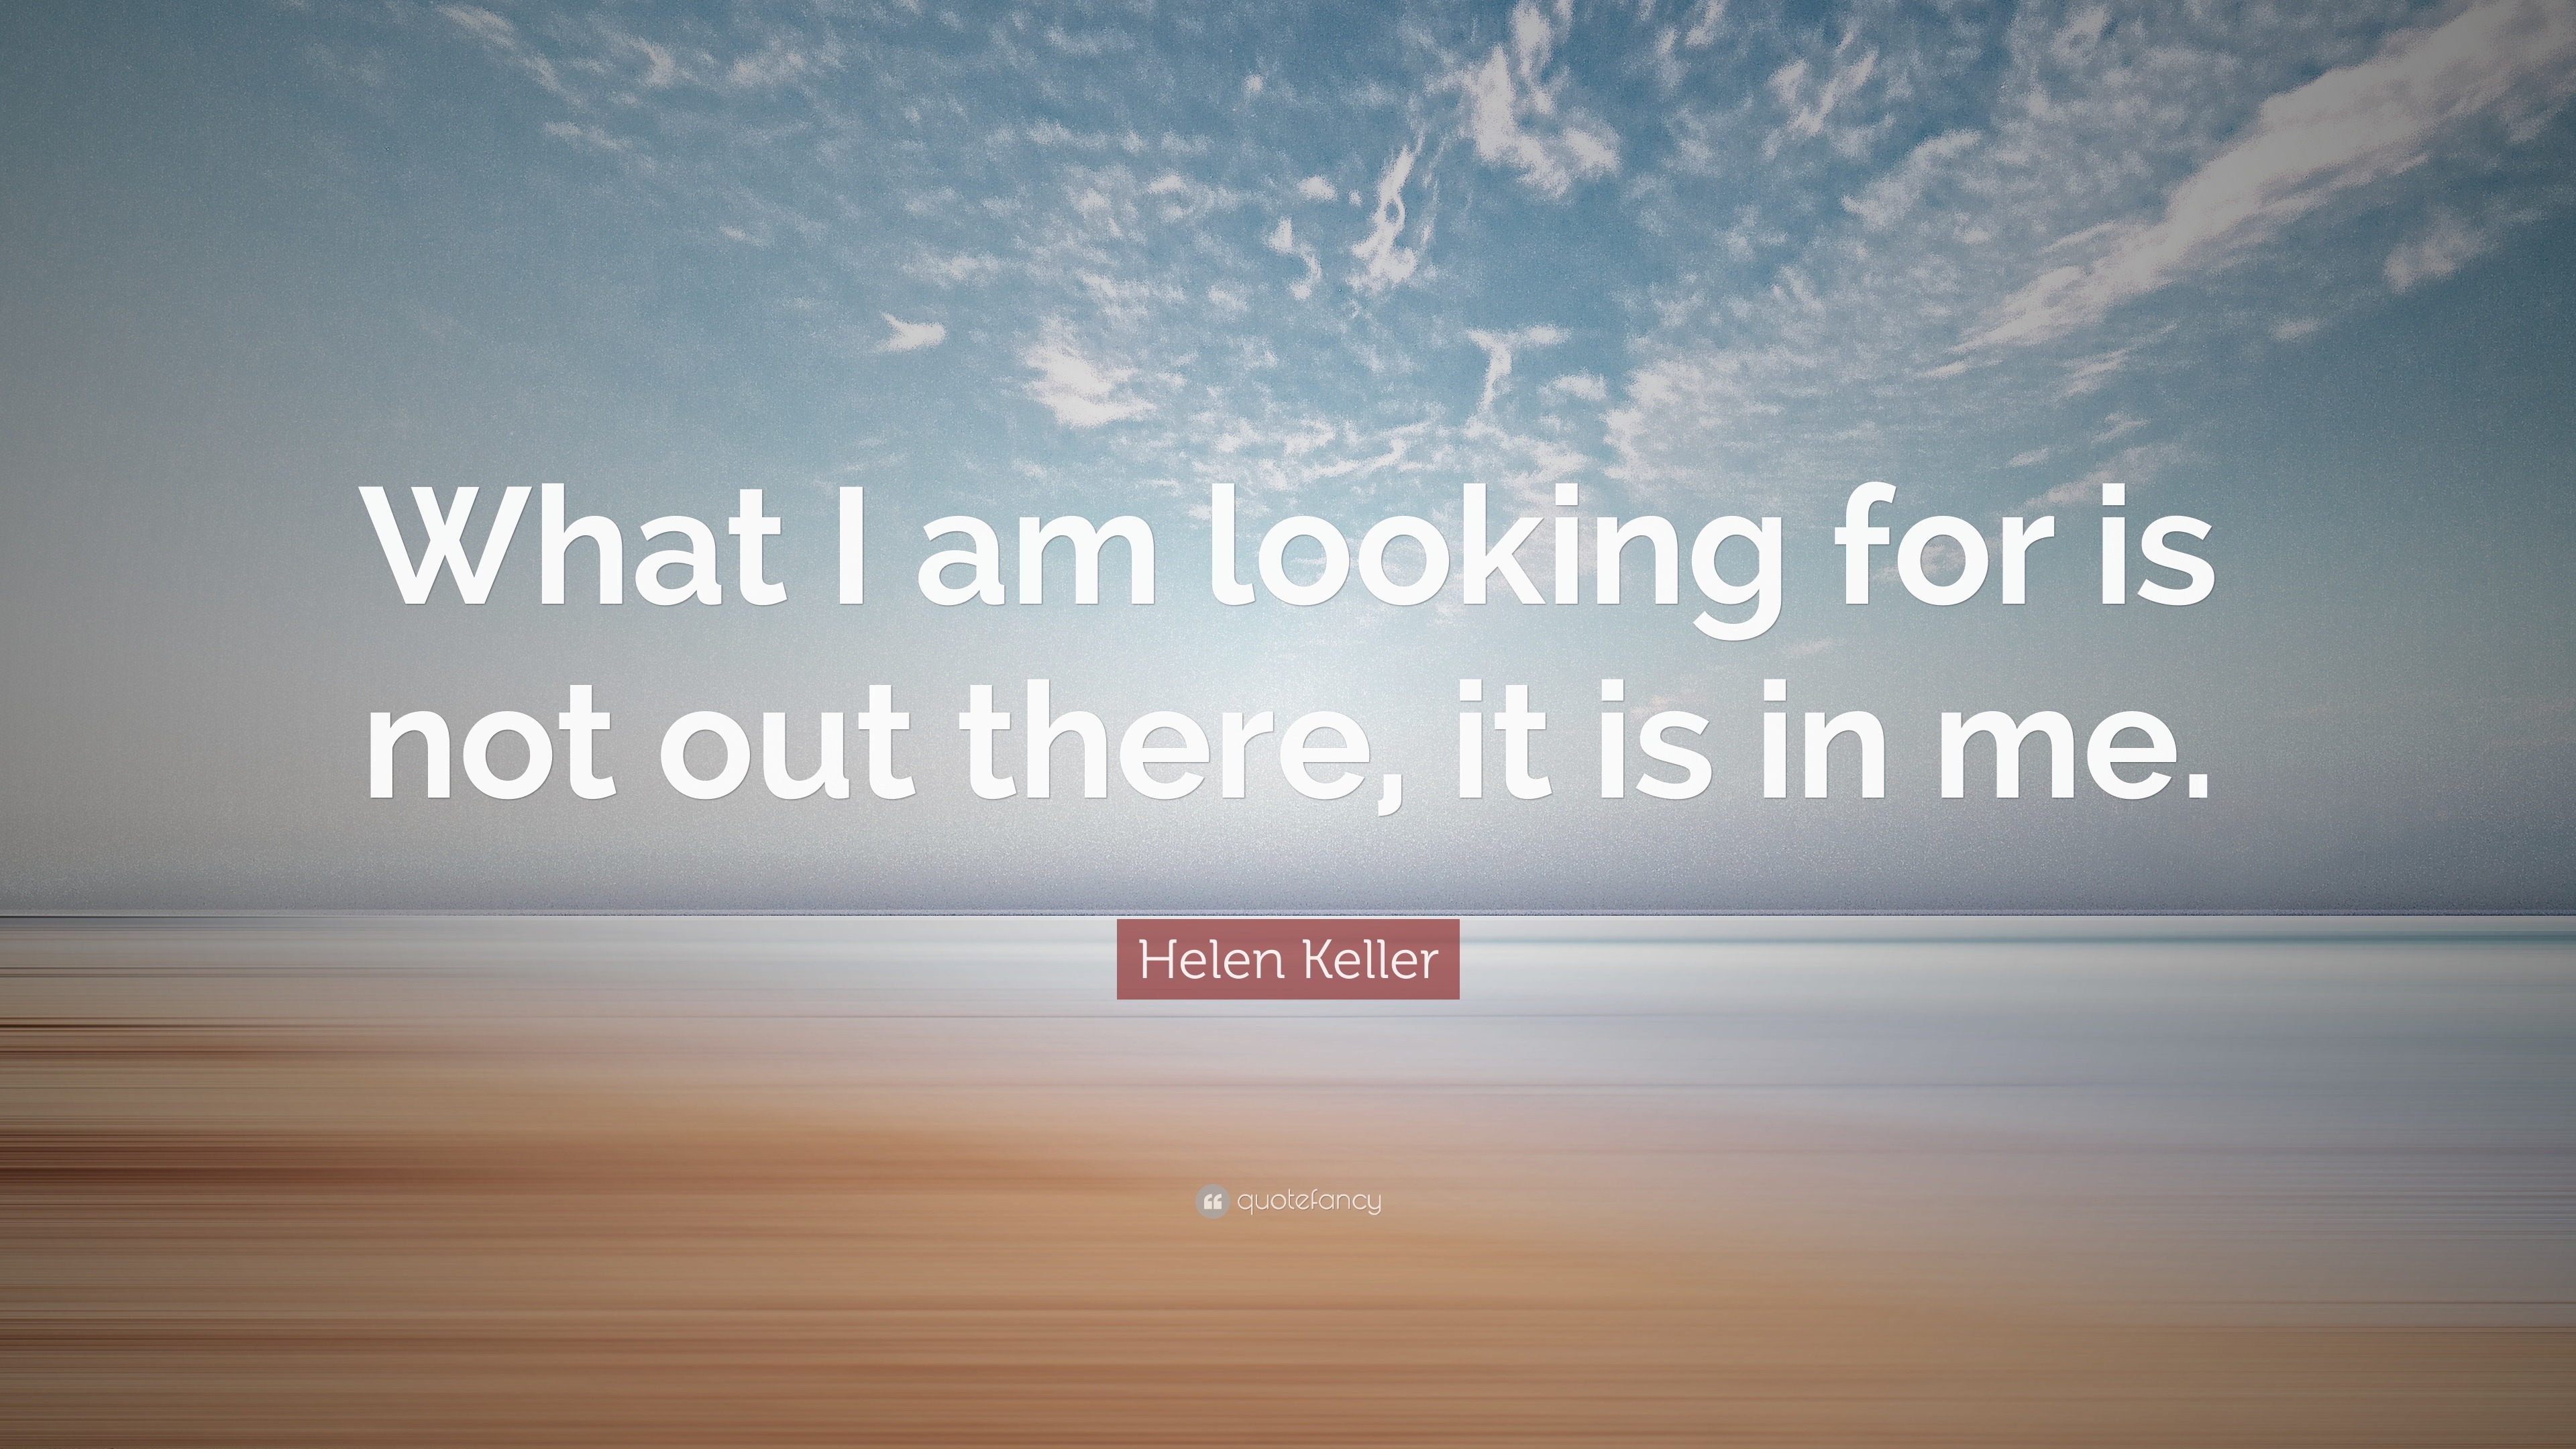 Helen Keller Quote: "What I am looking for is not out there, it is in me." (12 wallpapers ...